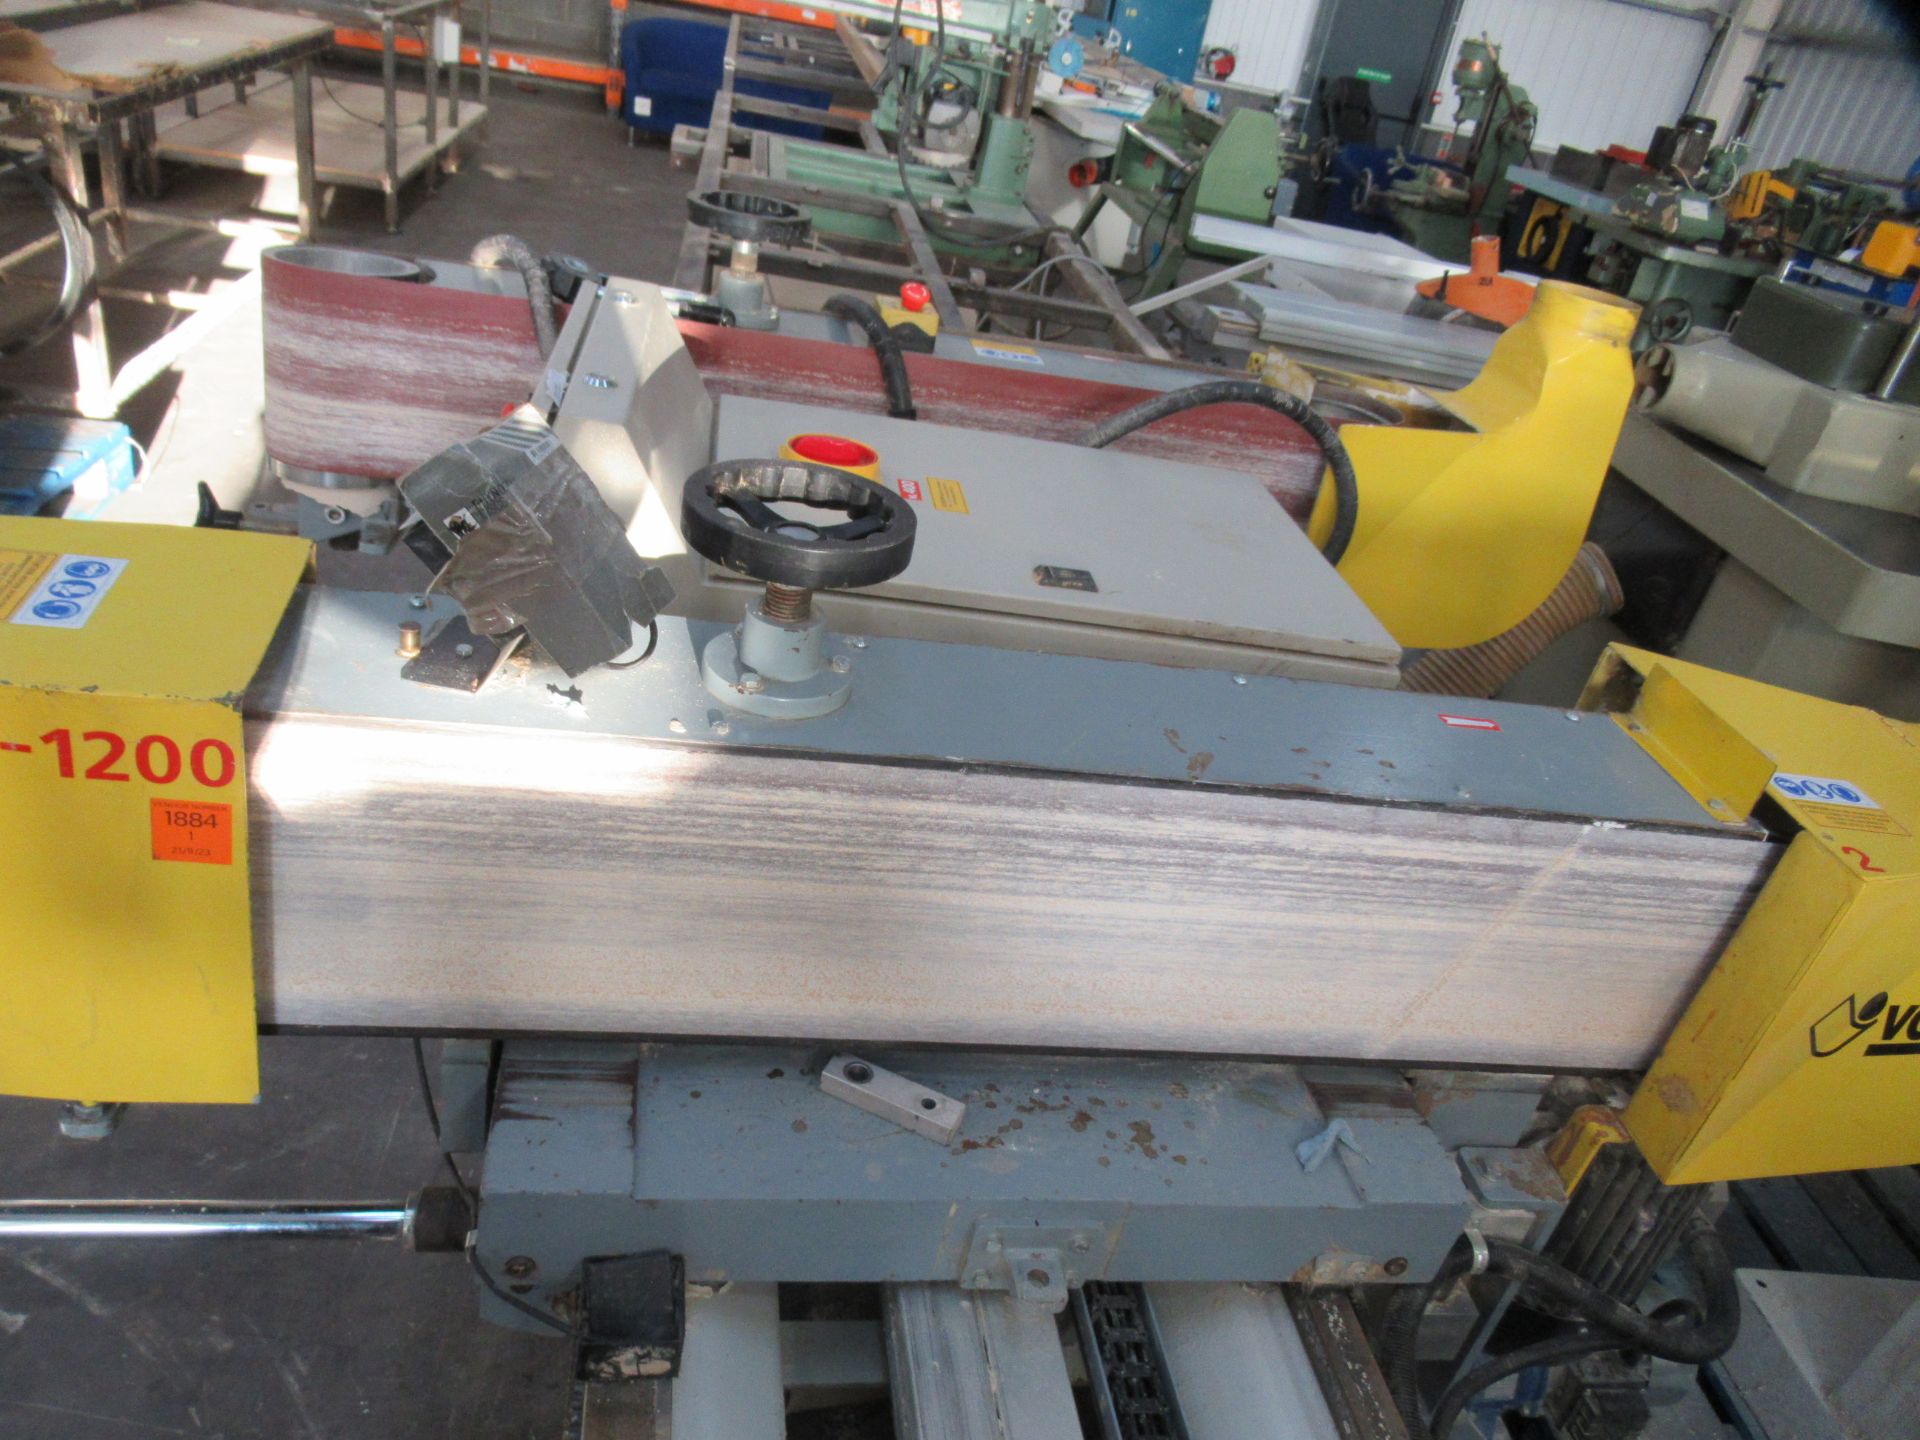 Volpato RCG 1200 Double Sided Sander - 400V; 15.8kW - Image 2 of 9